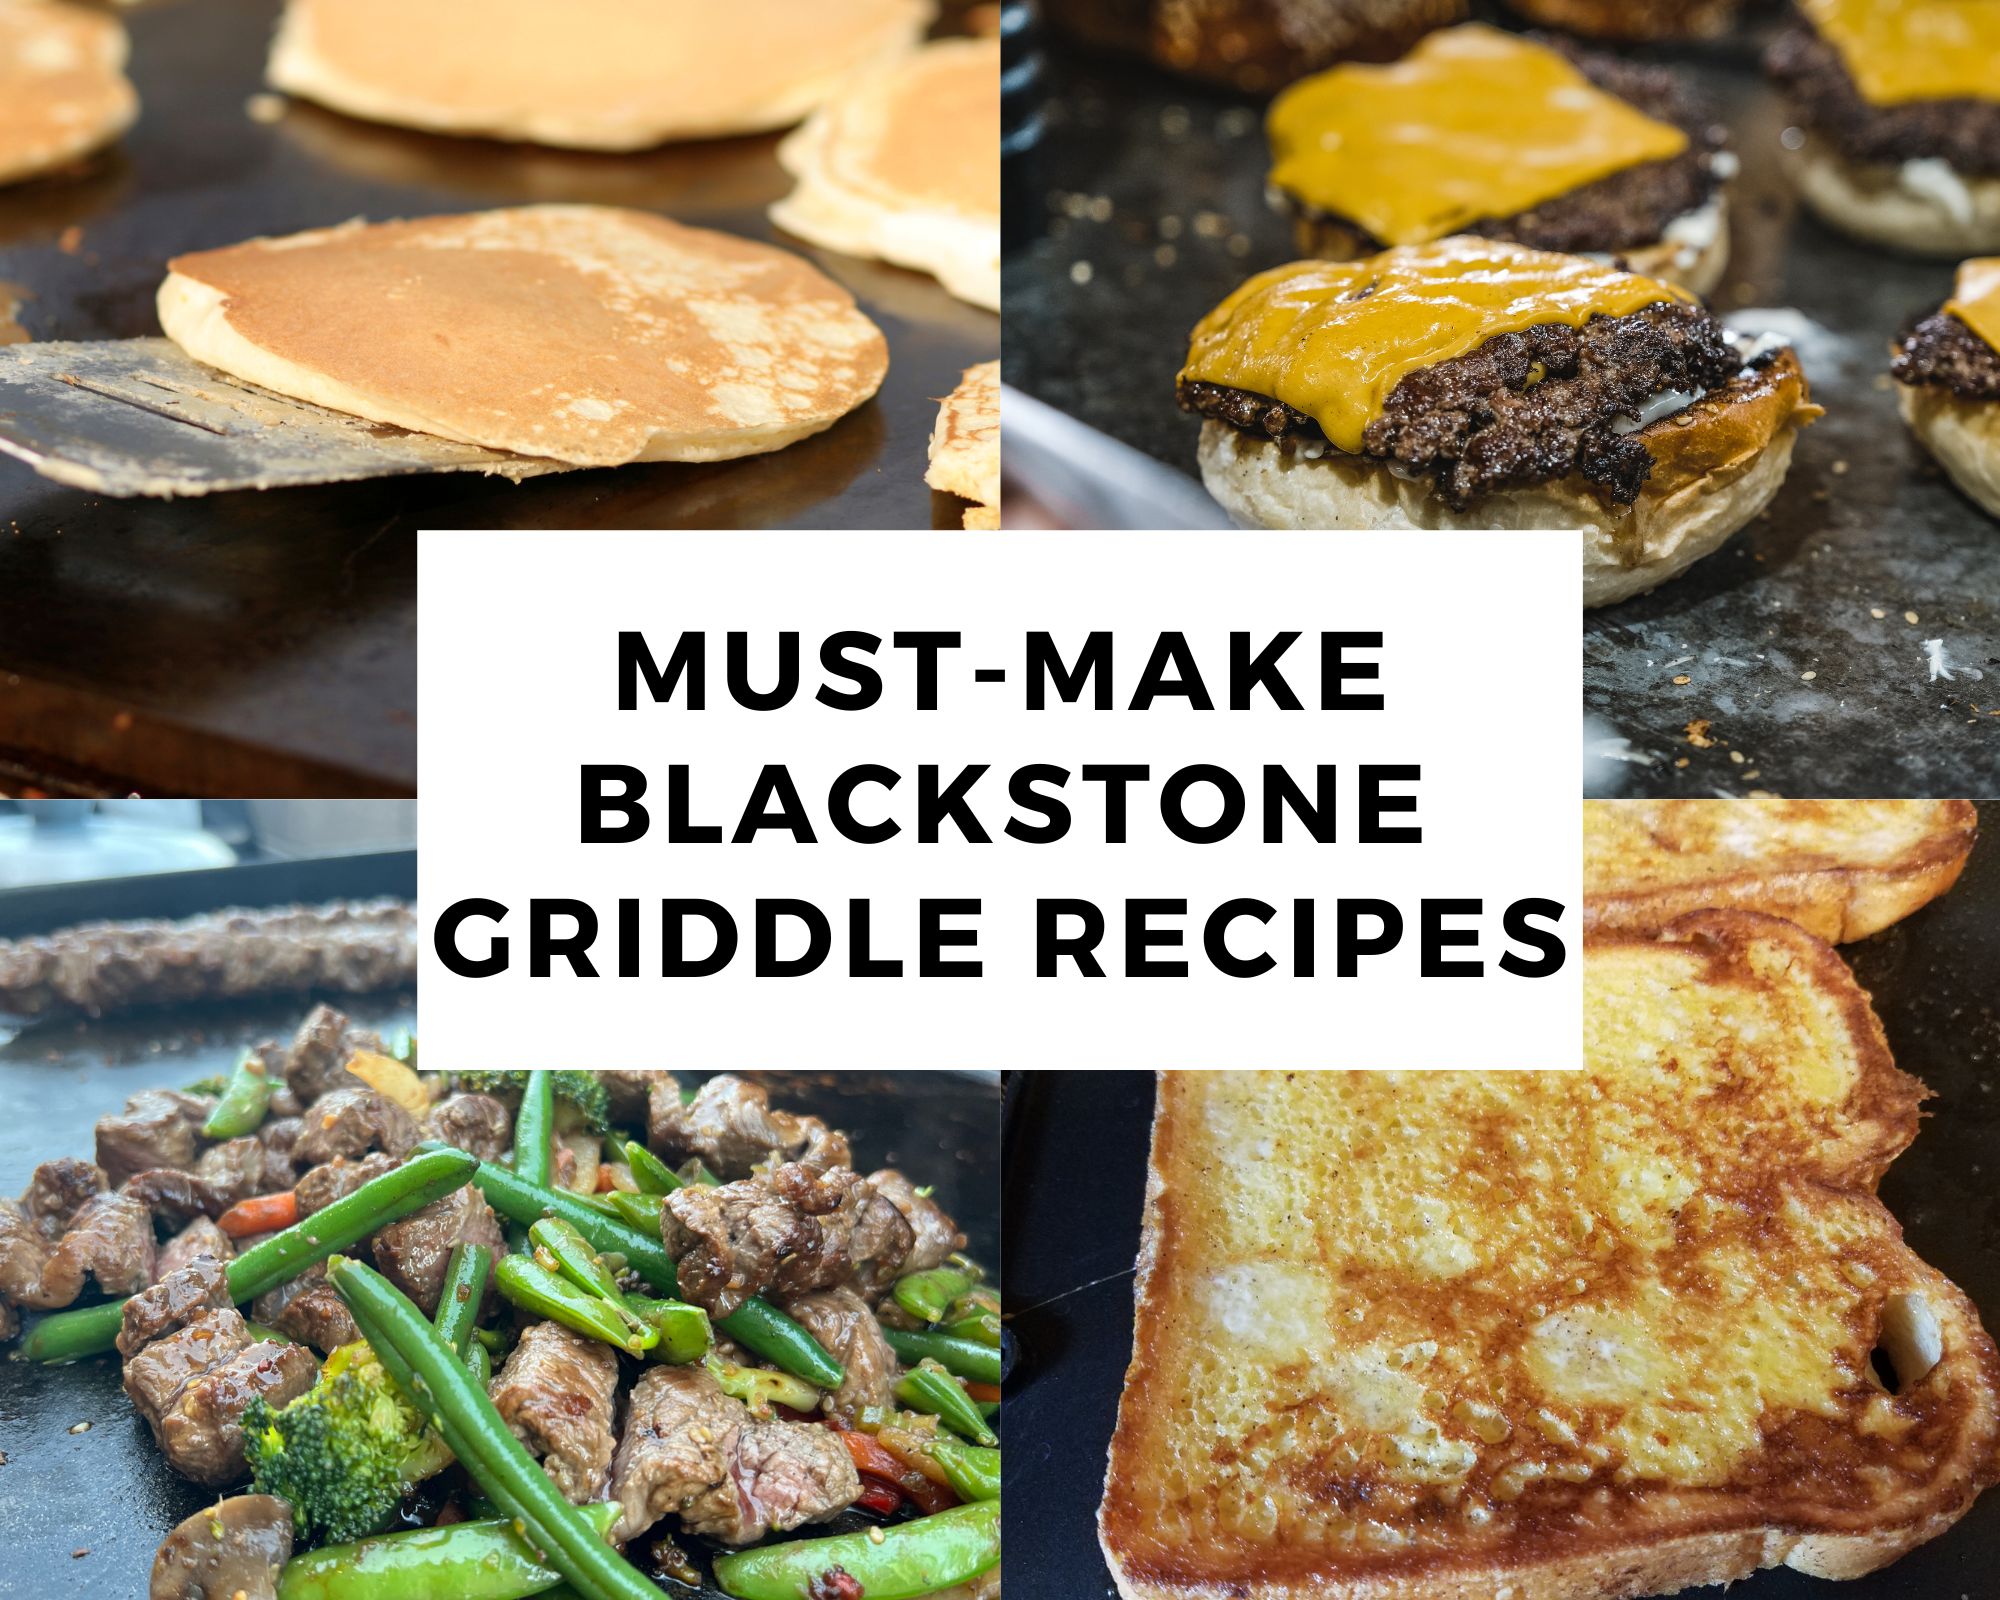 The Best Pancakes on the Griddle - Favorite Blackstone Pancakes